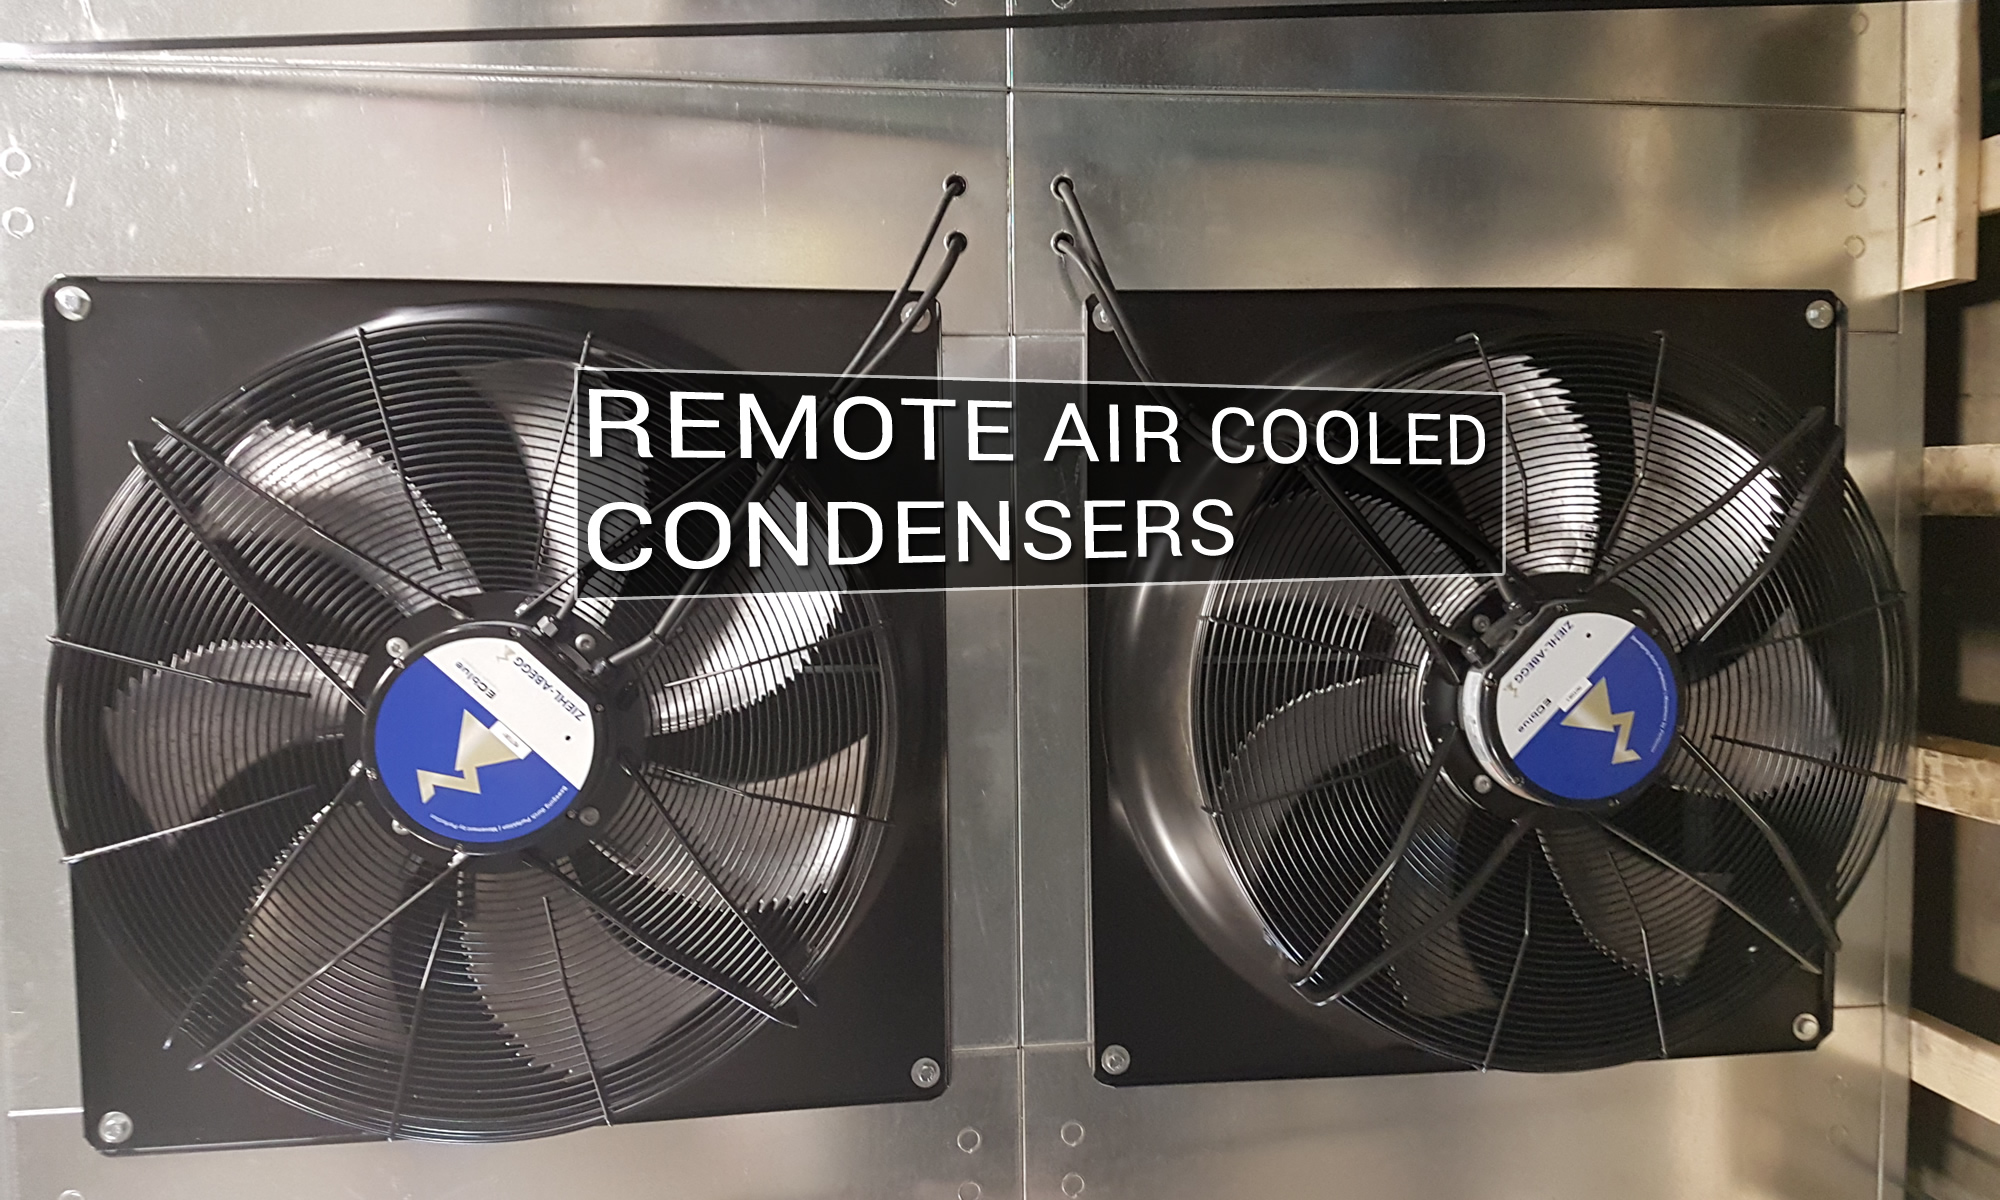 Remote Air Cooled Condensers